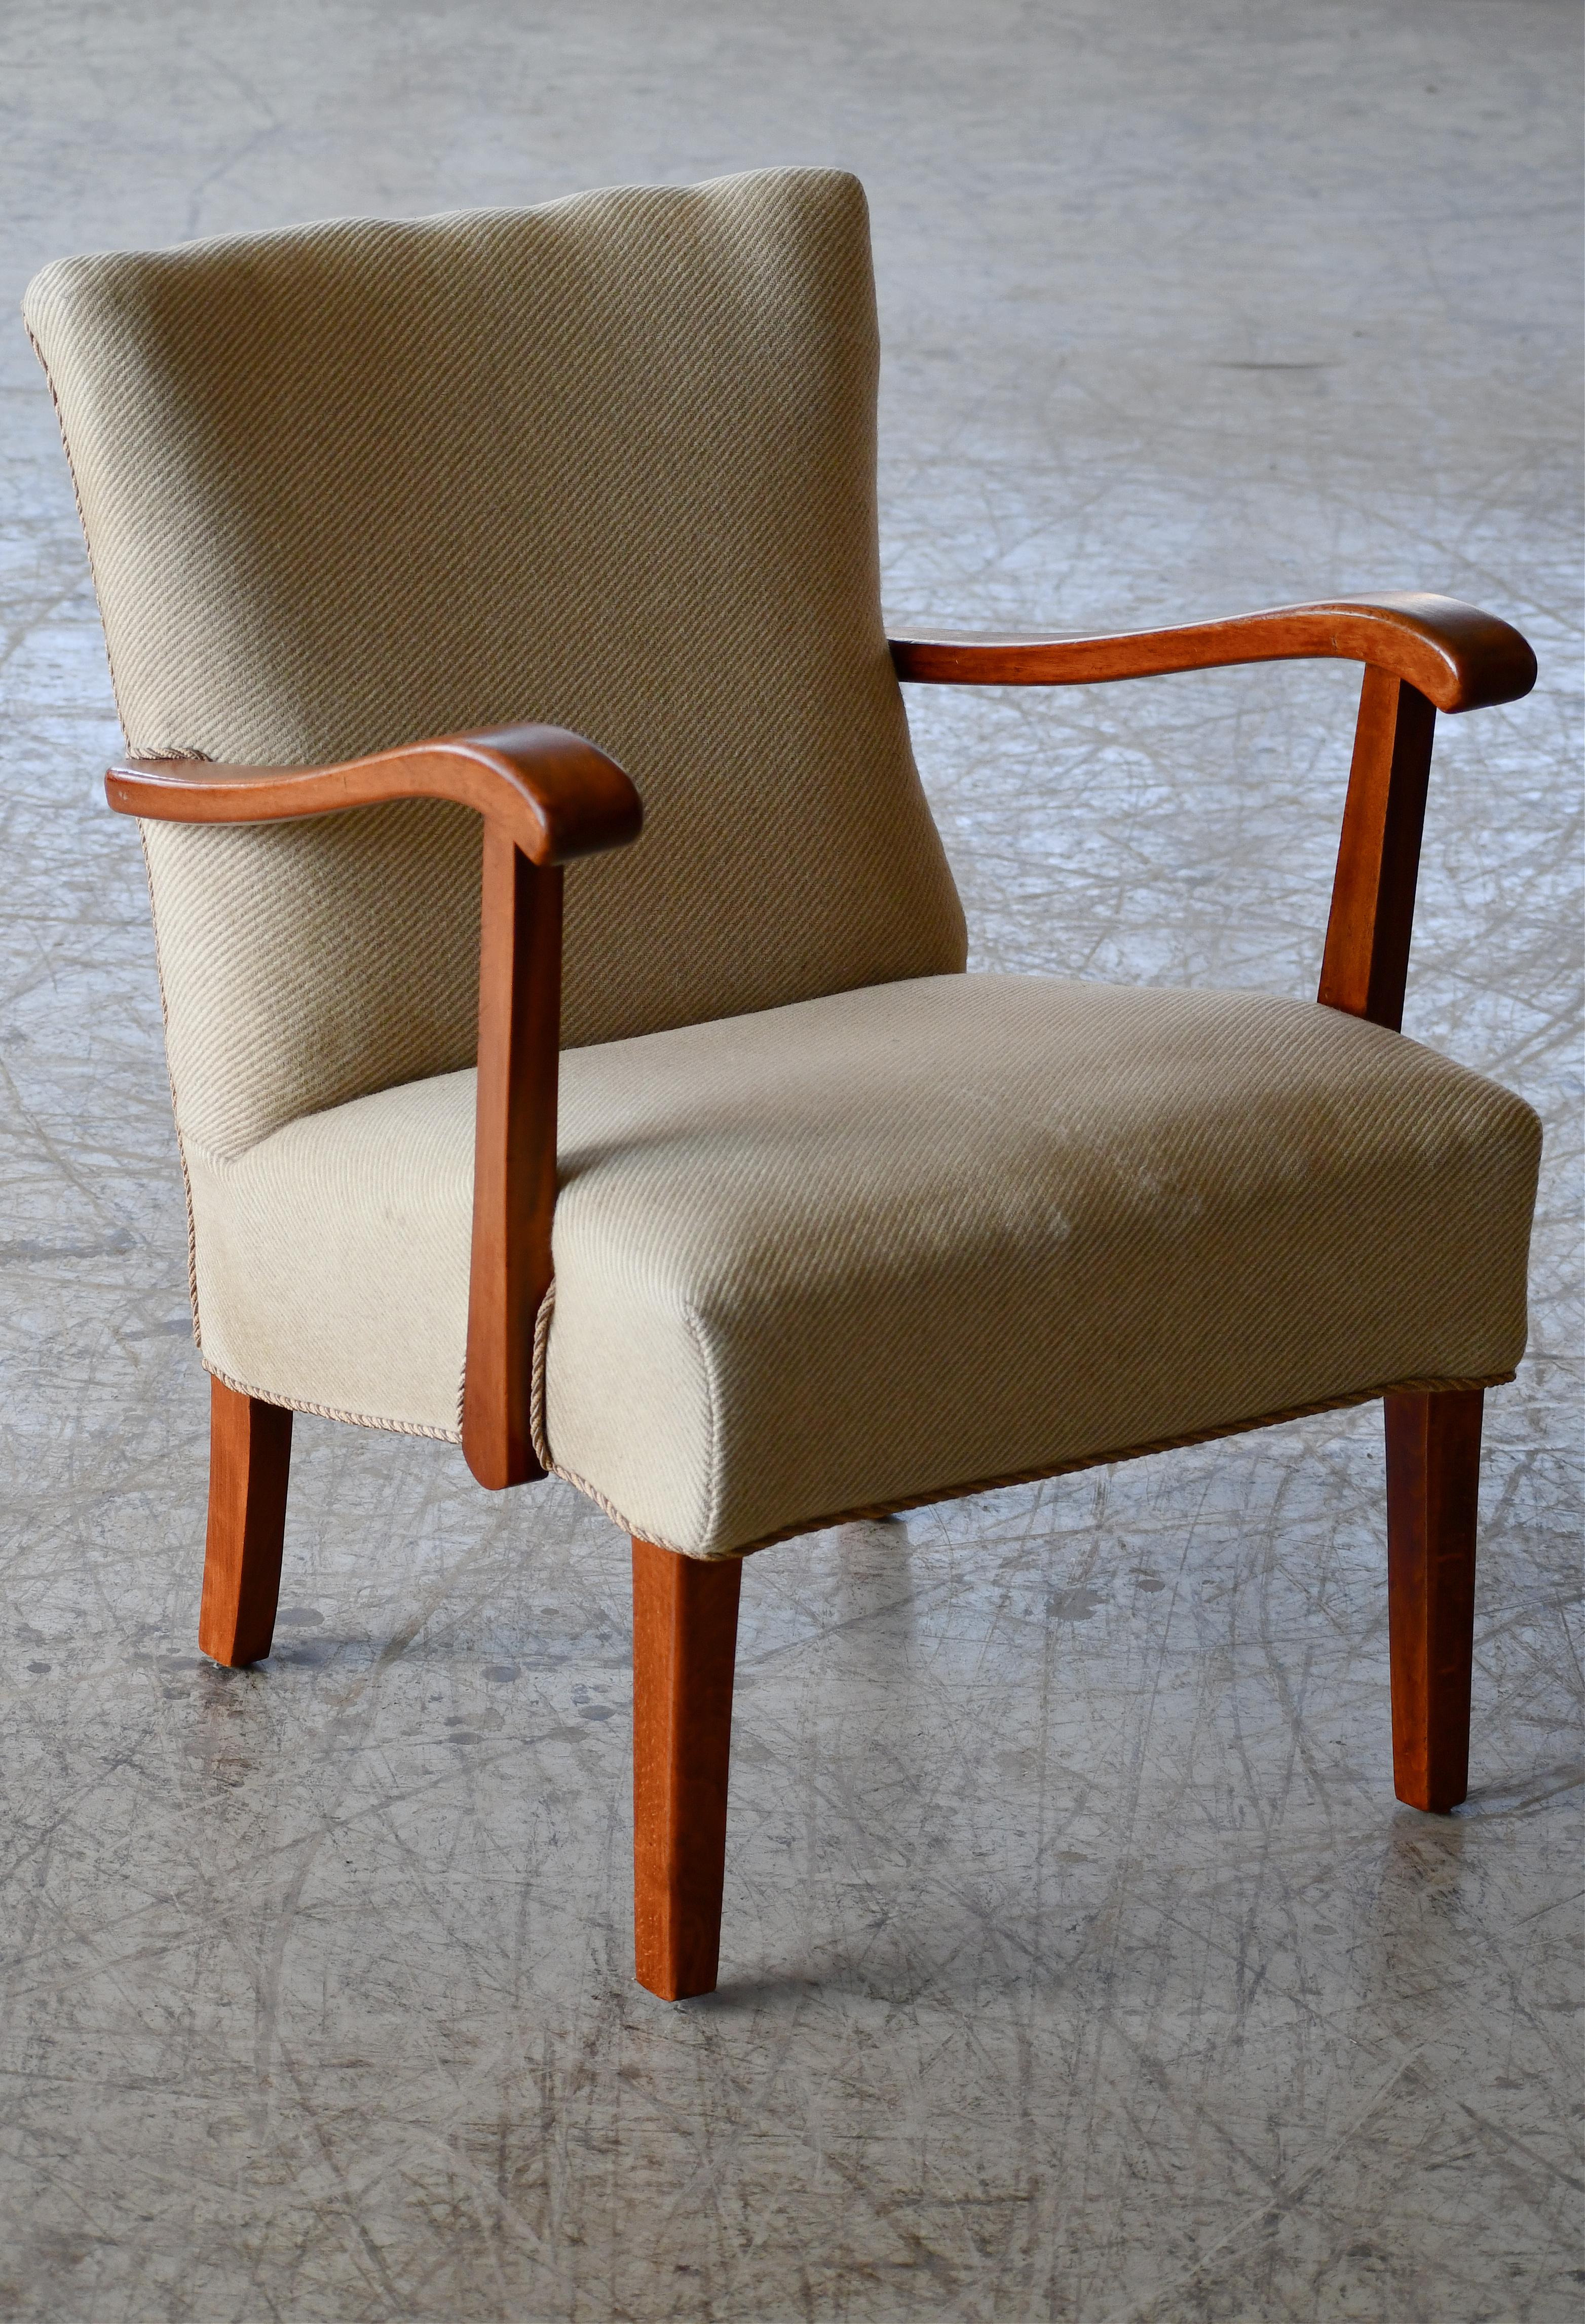 Mid-20th Century Danish 1940's Easy Chair with Open Armrests In Beech